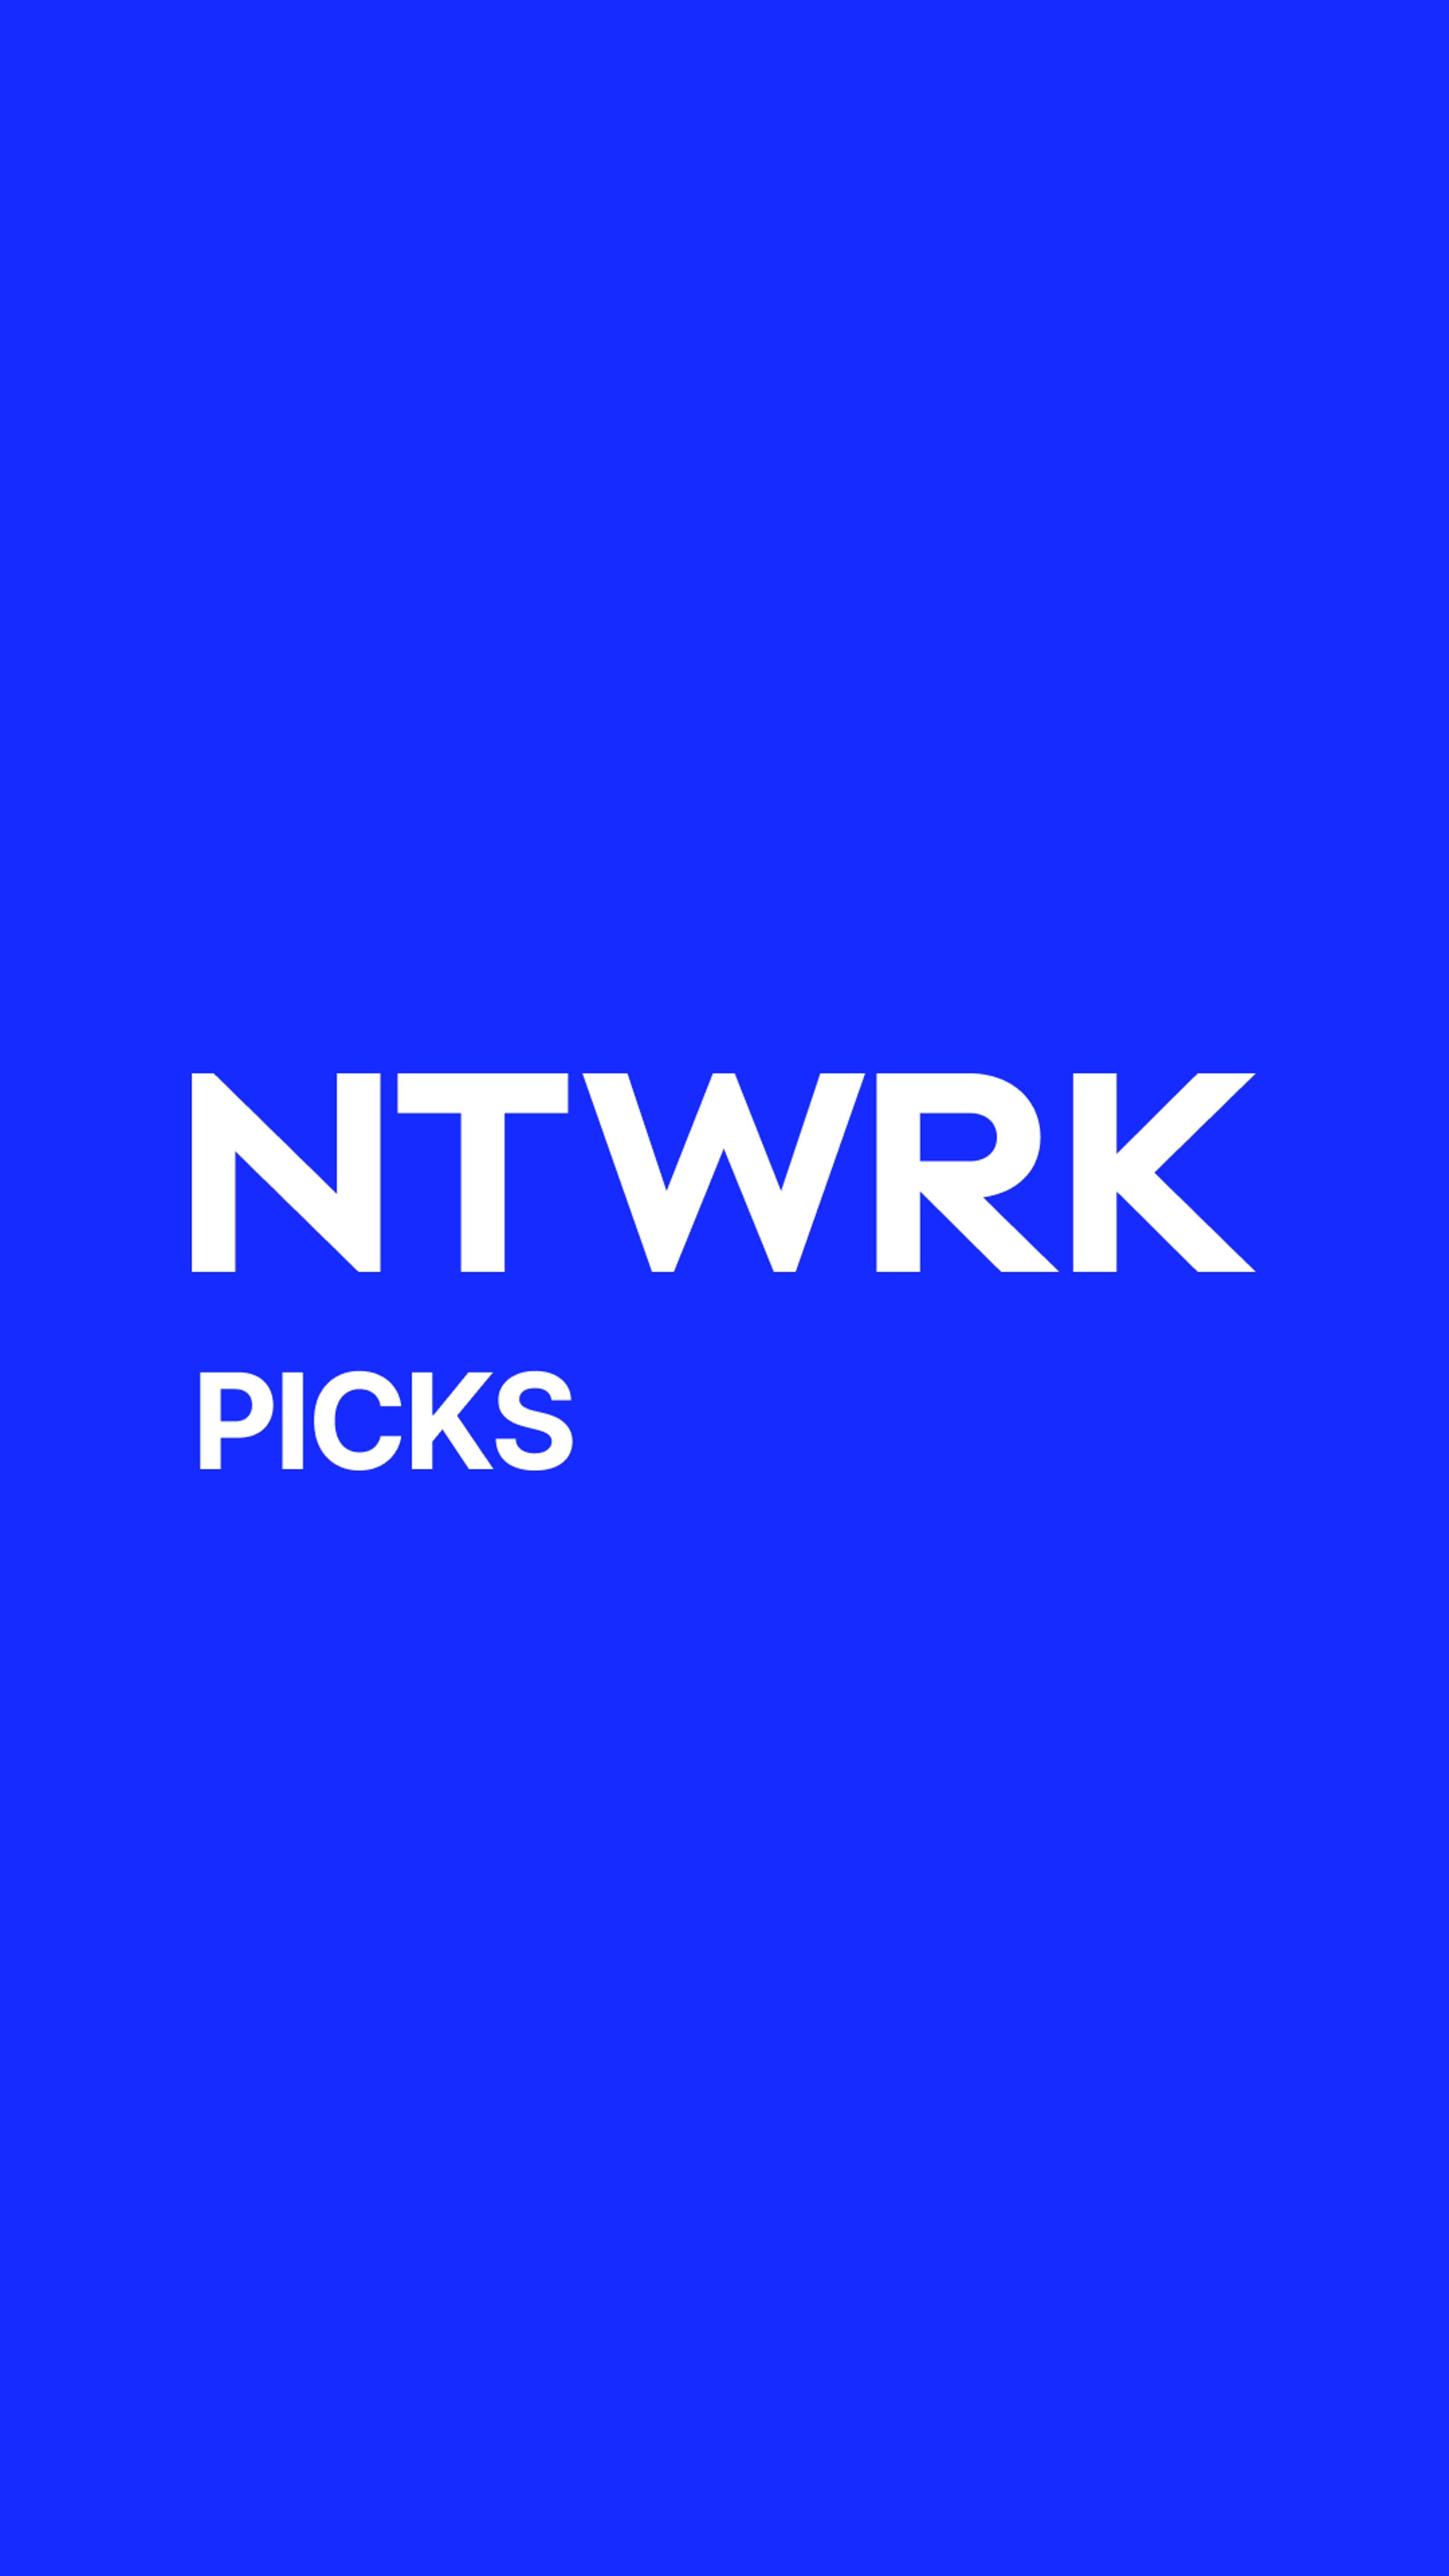 Preview image for the show titled "NTWRK Picks: Hellstar" at May 6, 2024